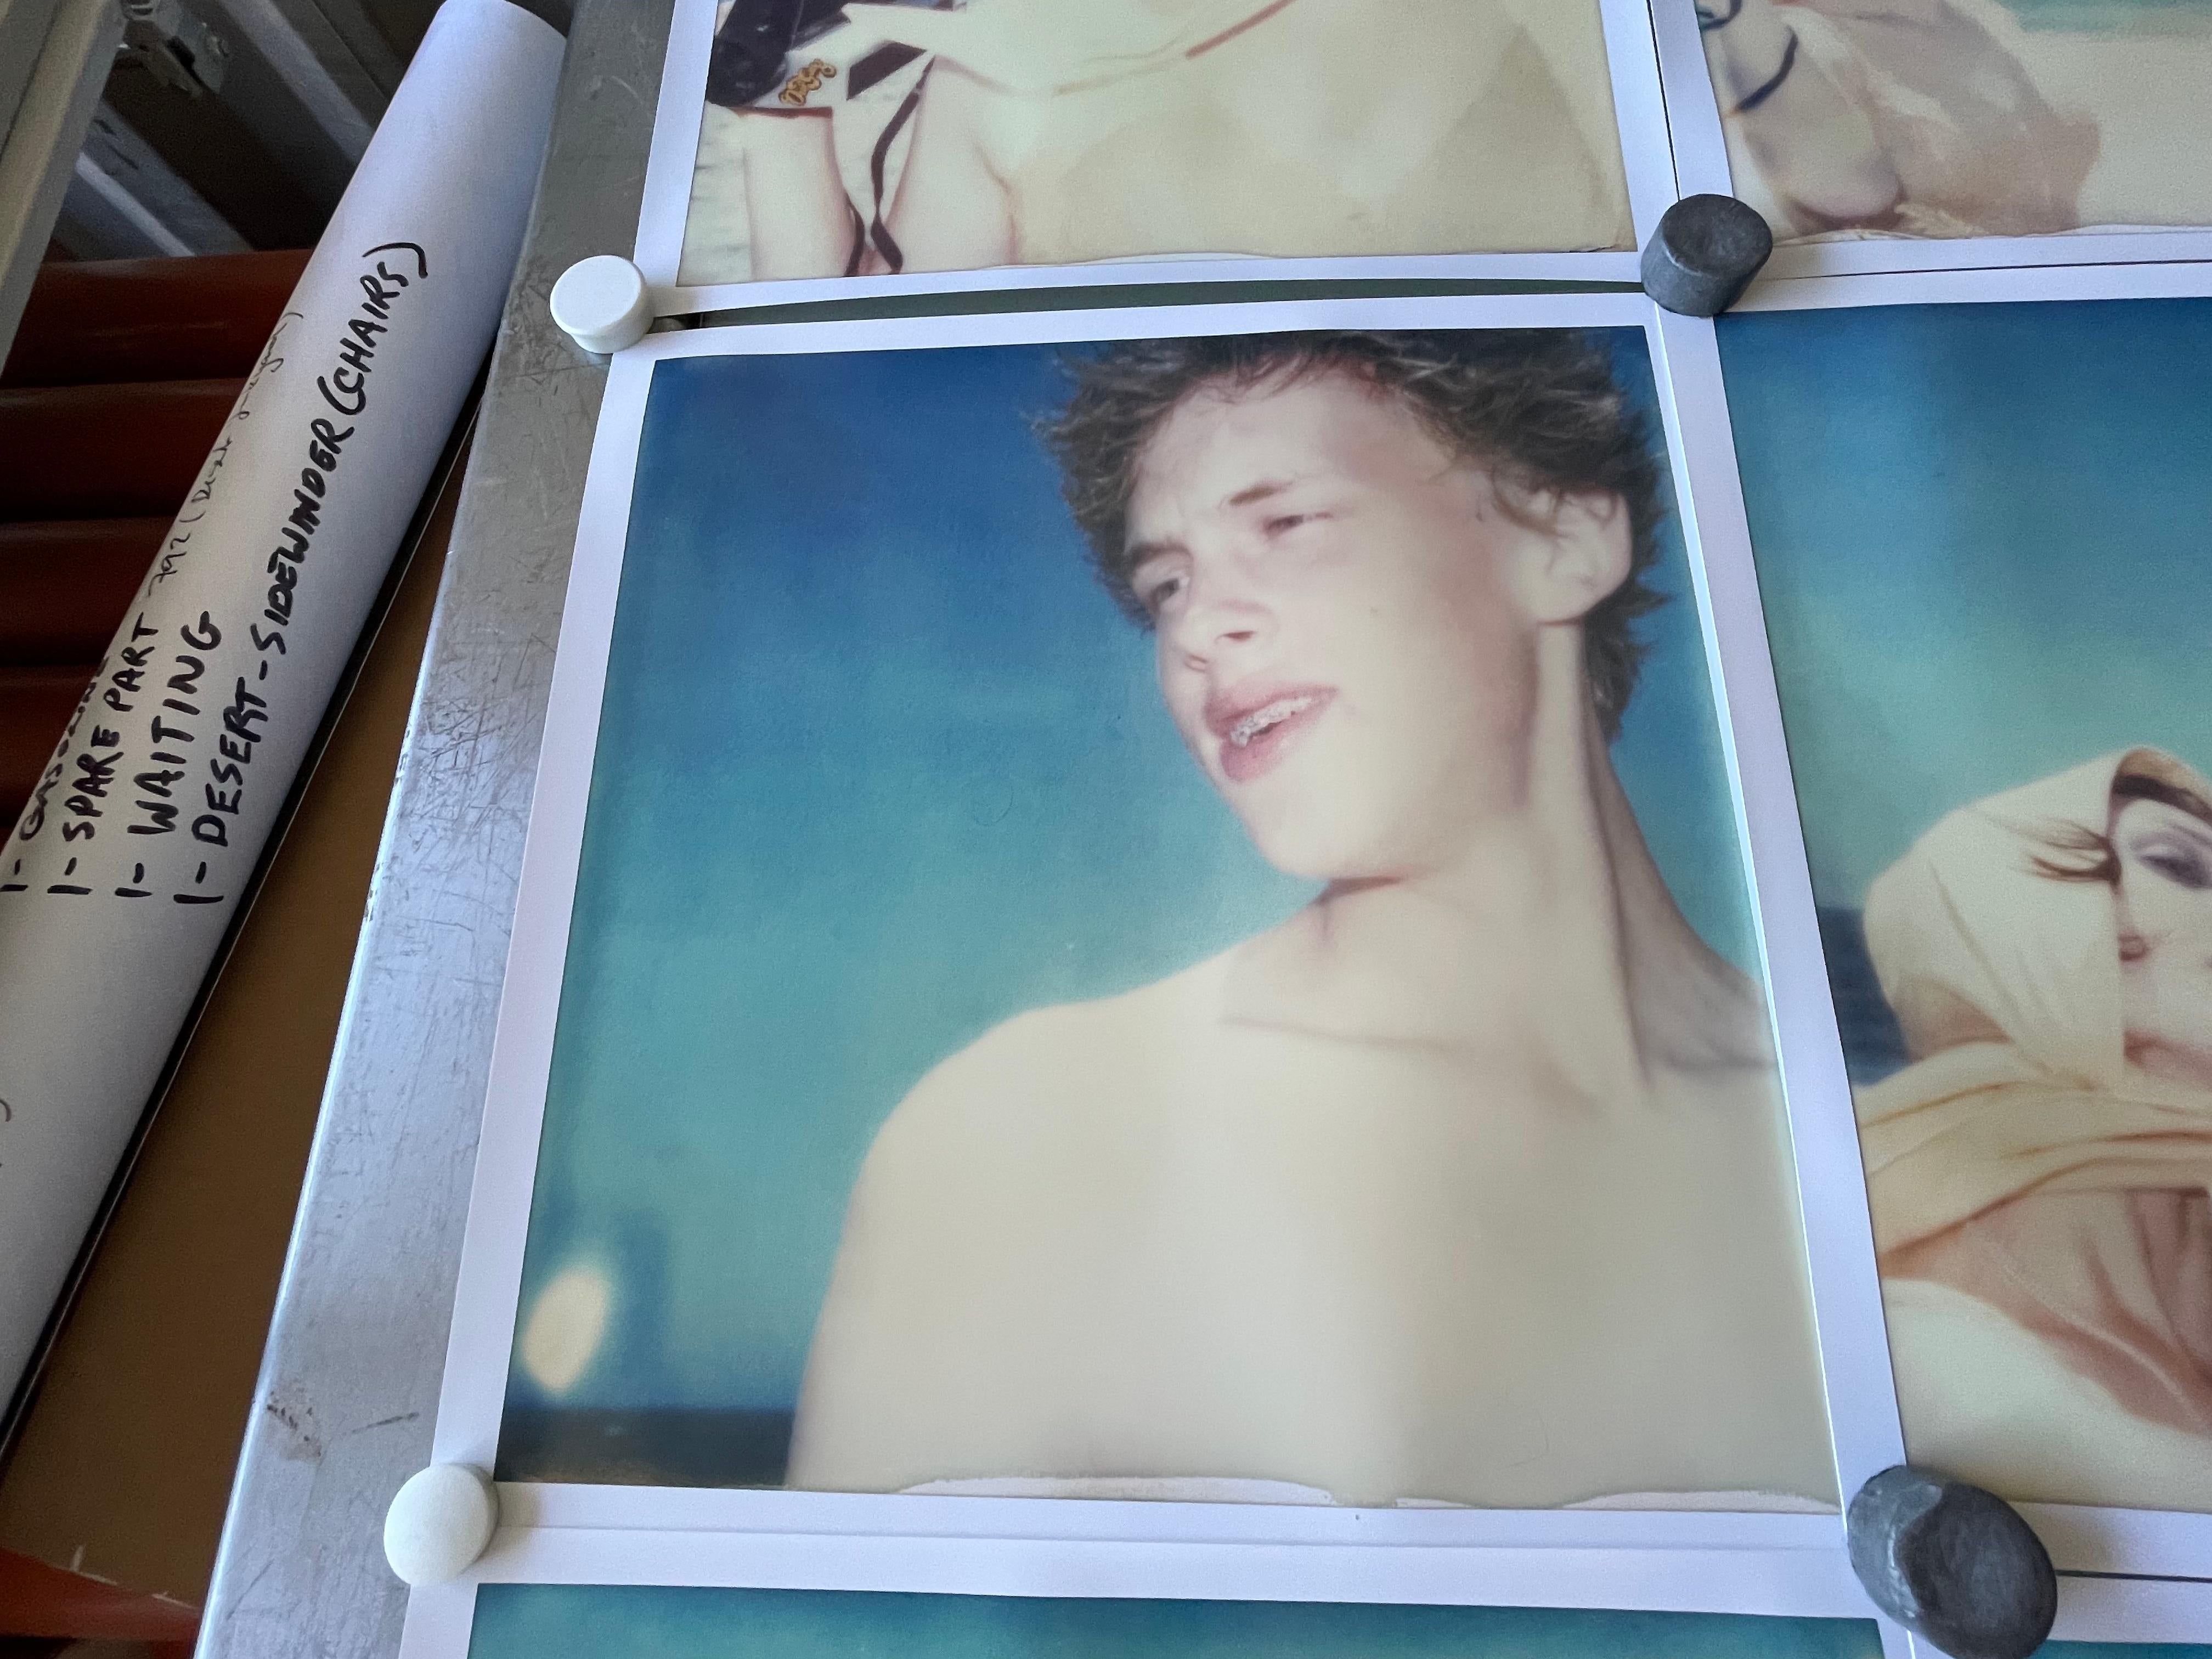 The Diva and the Boy (Beachshoot) - 9 pieces - Polaroid, Vintage, Contemporary For Sale 2